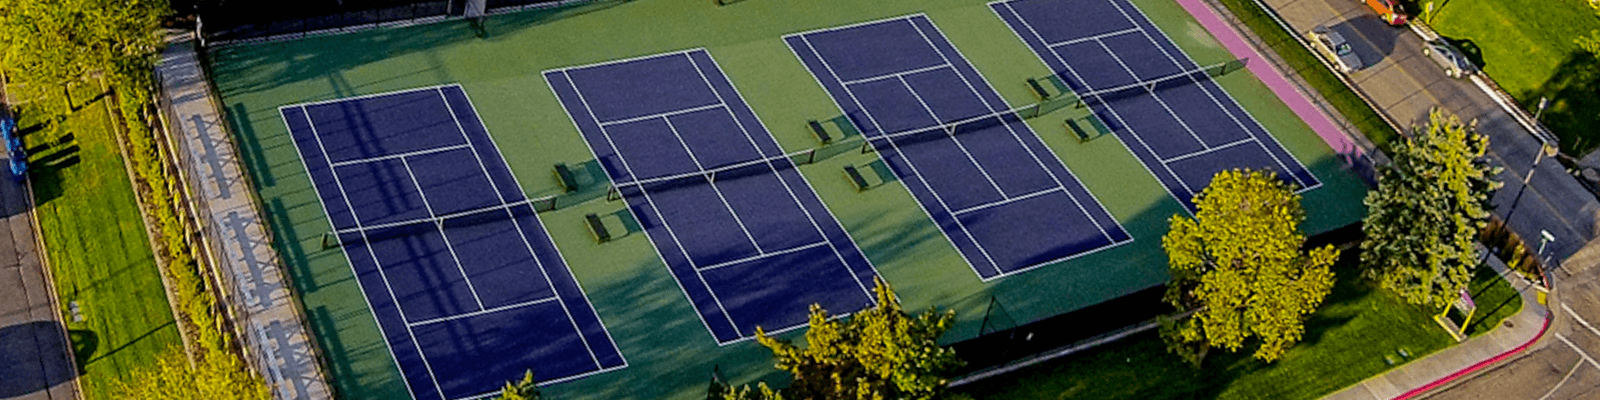 outdoor court to play pickleball